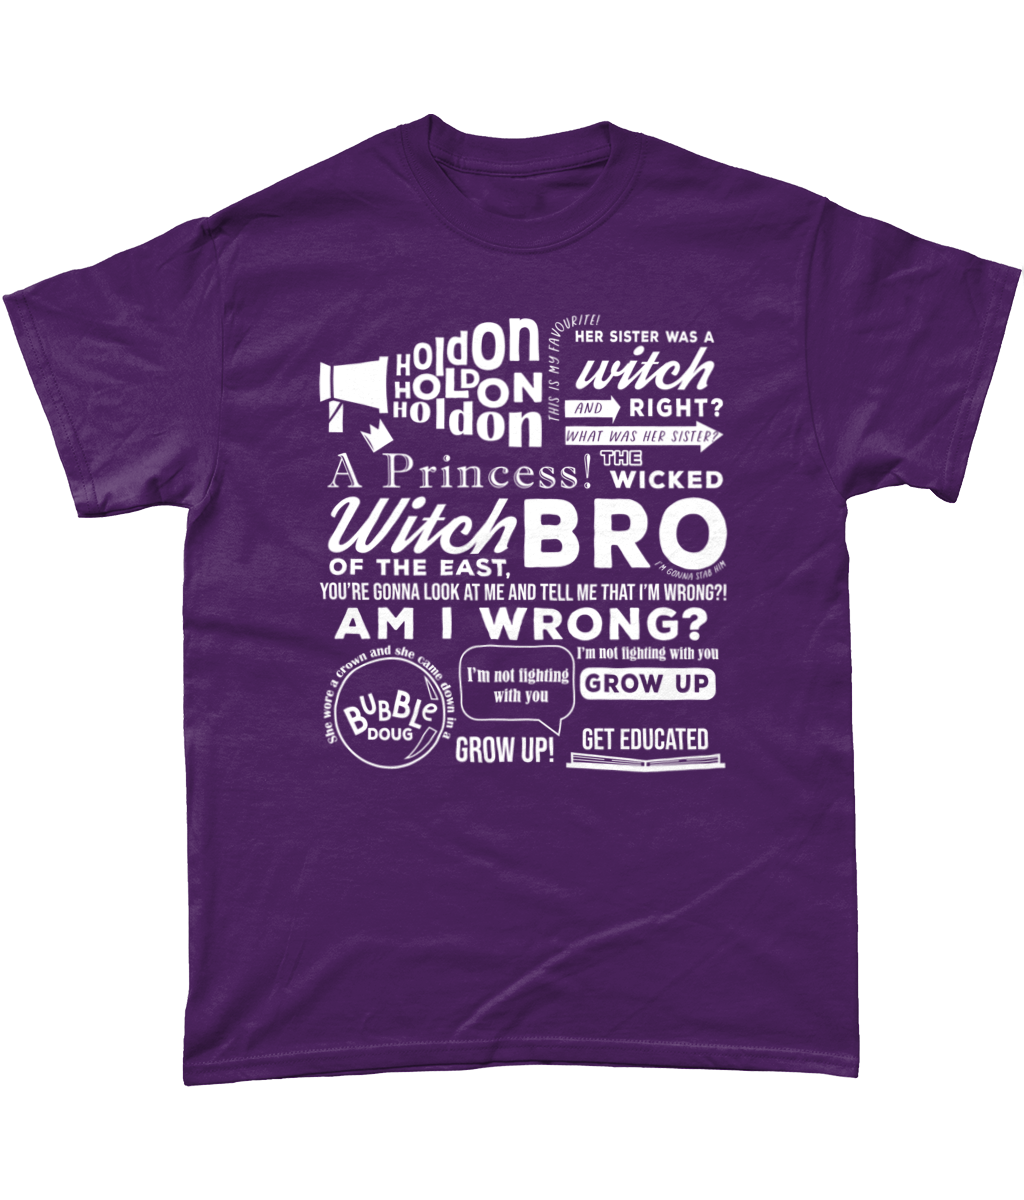 The Wicked Witch of the East Bro T Shirt